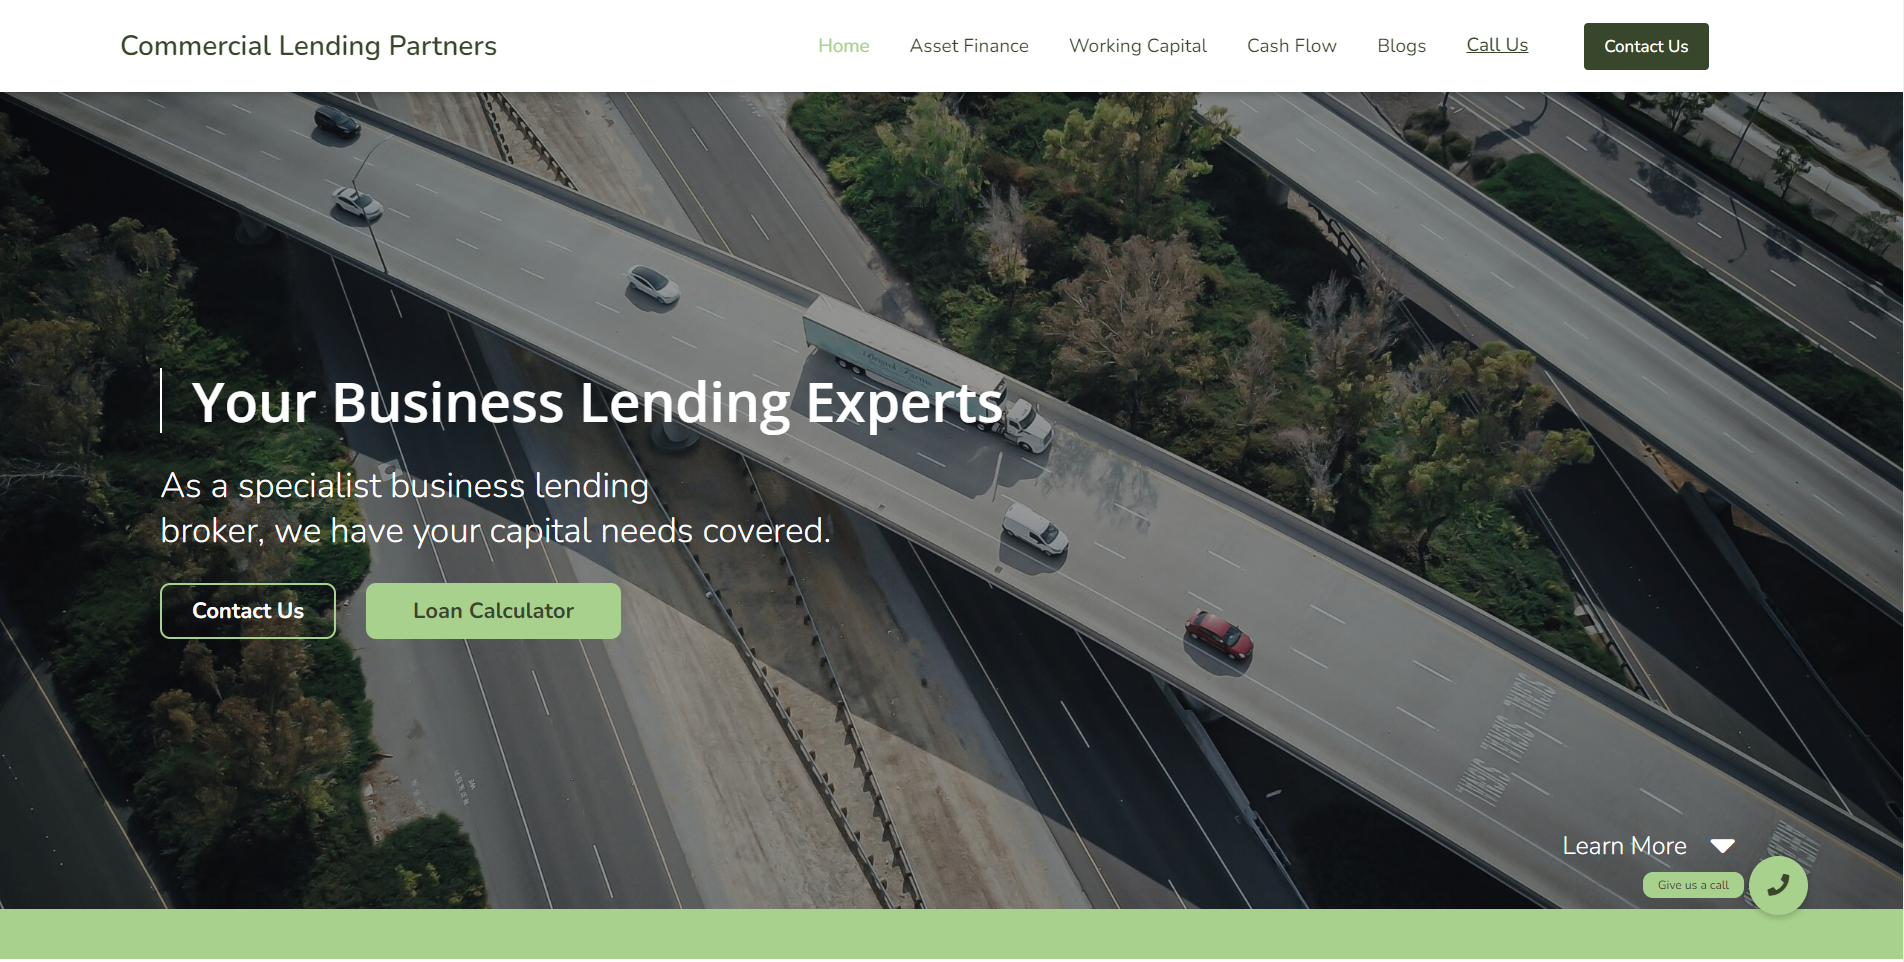 Commercial lending partners Homepage. Website designed and developed by digital refinery